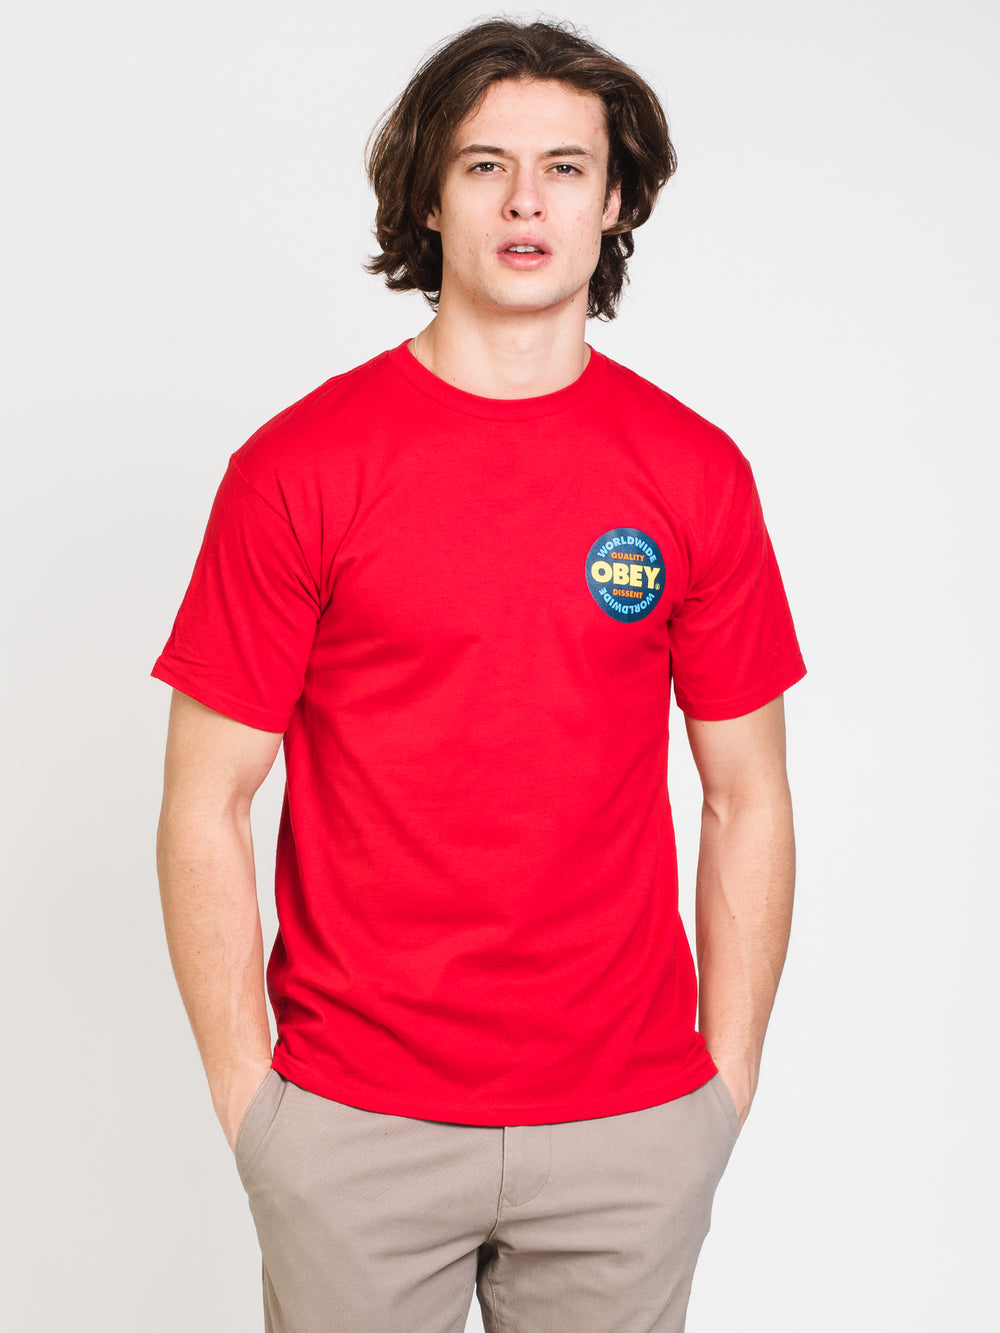 OBEY QUALITY DISSENT SHORT SLEEVE TEE  - CLEARANCE